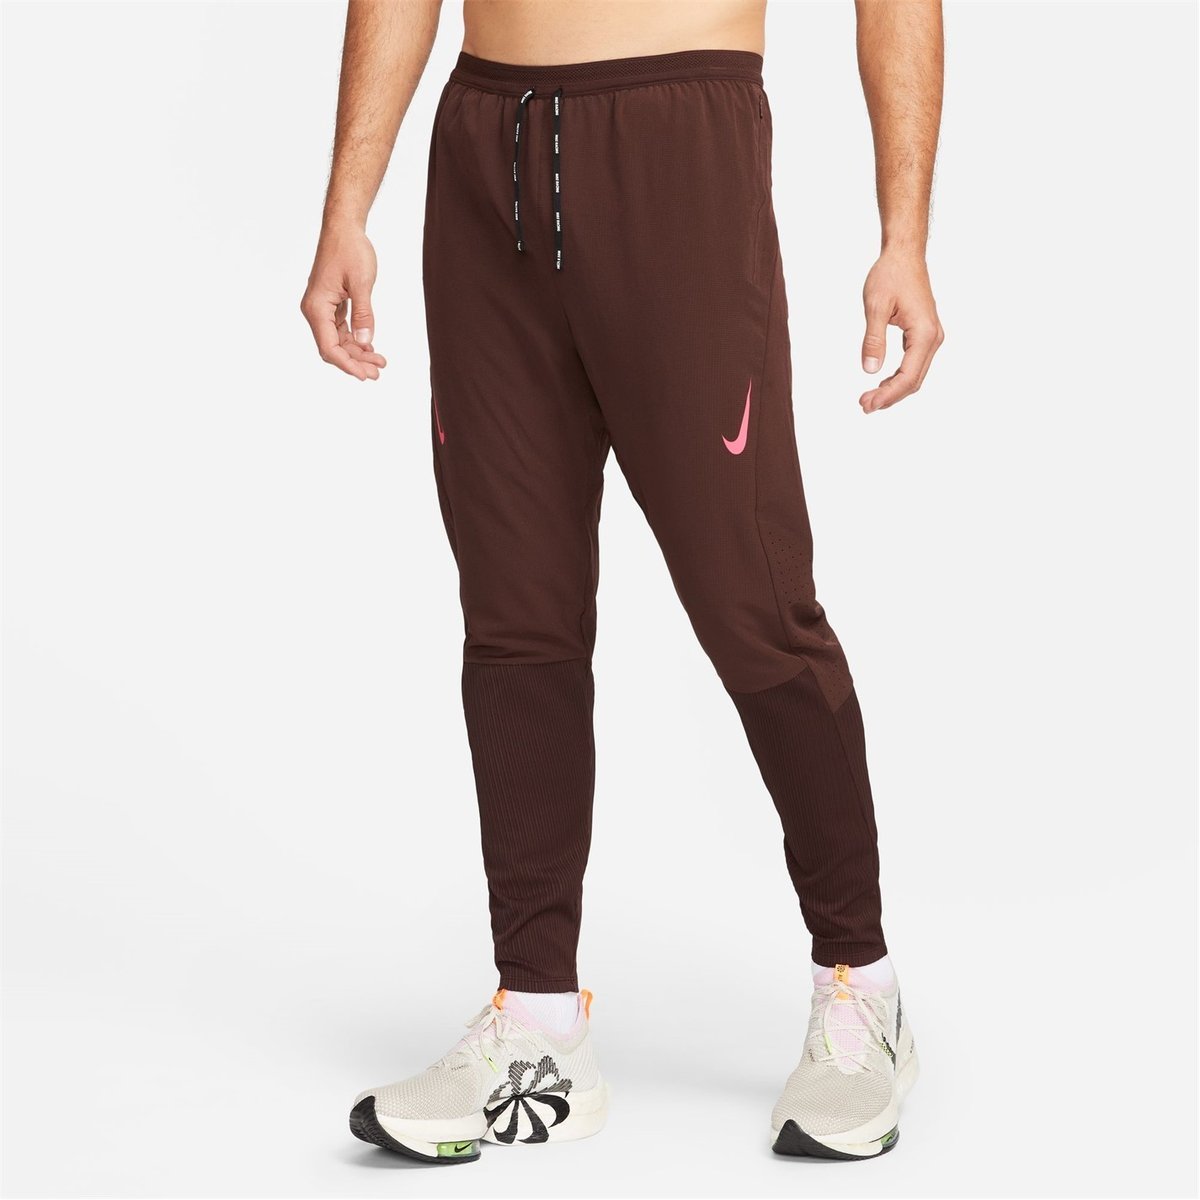 Under Armour, Storm Trail Pant Ld99, Steel